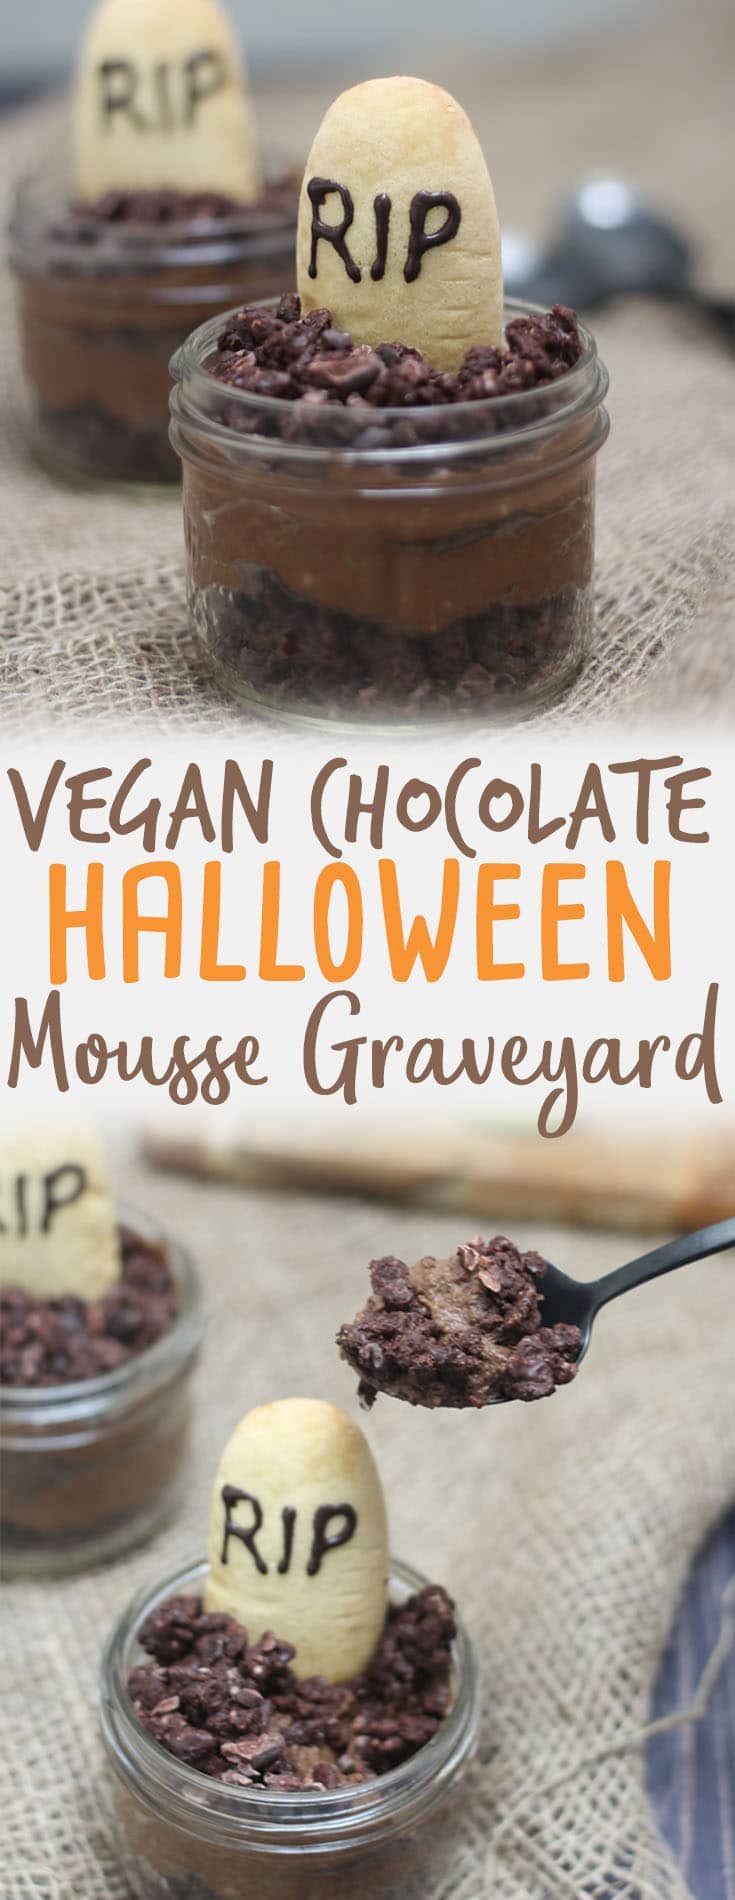 A pinterest image of Halloween graveyard mousse with an edible gravestone saying RIP in chocolate with the overlay text \"Vegan Chocolate Halloween Mousse Graveyard.\"